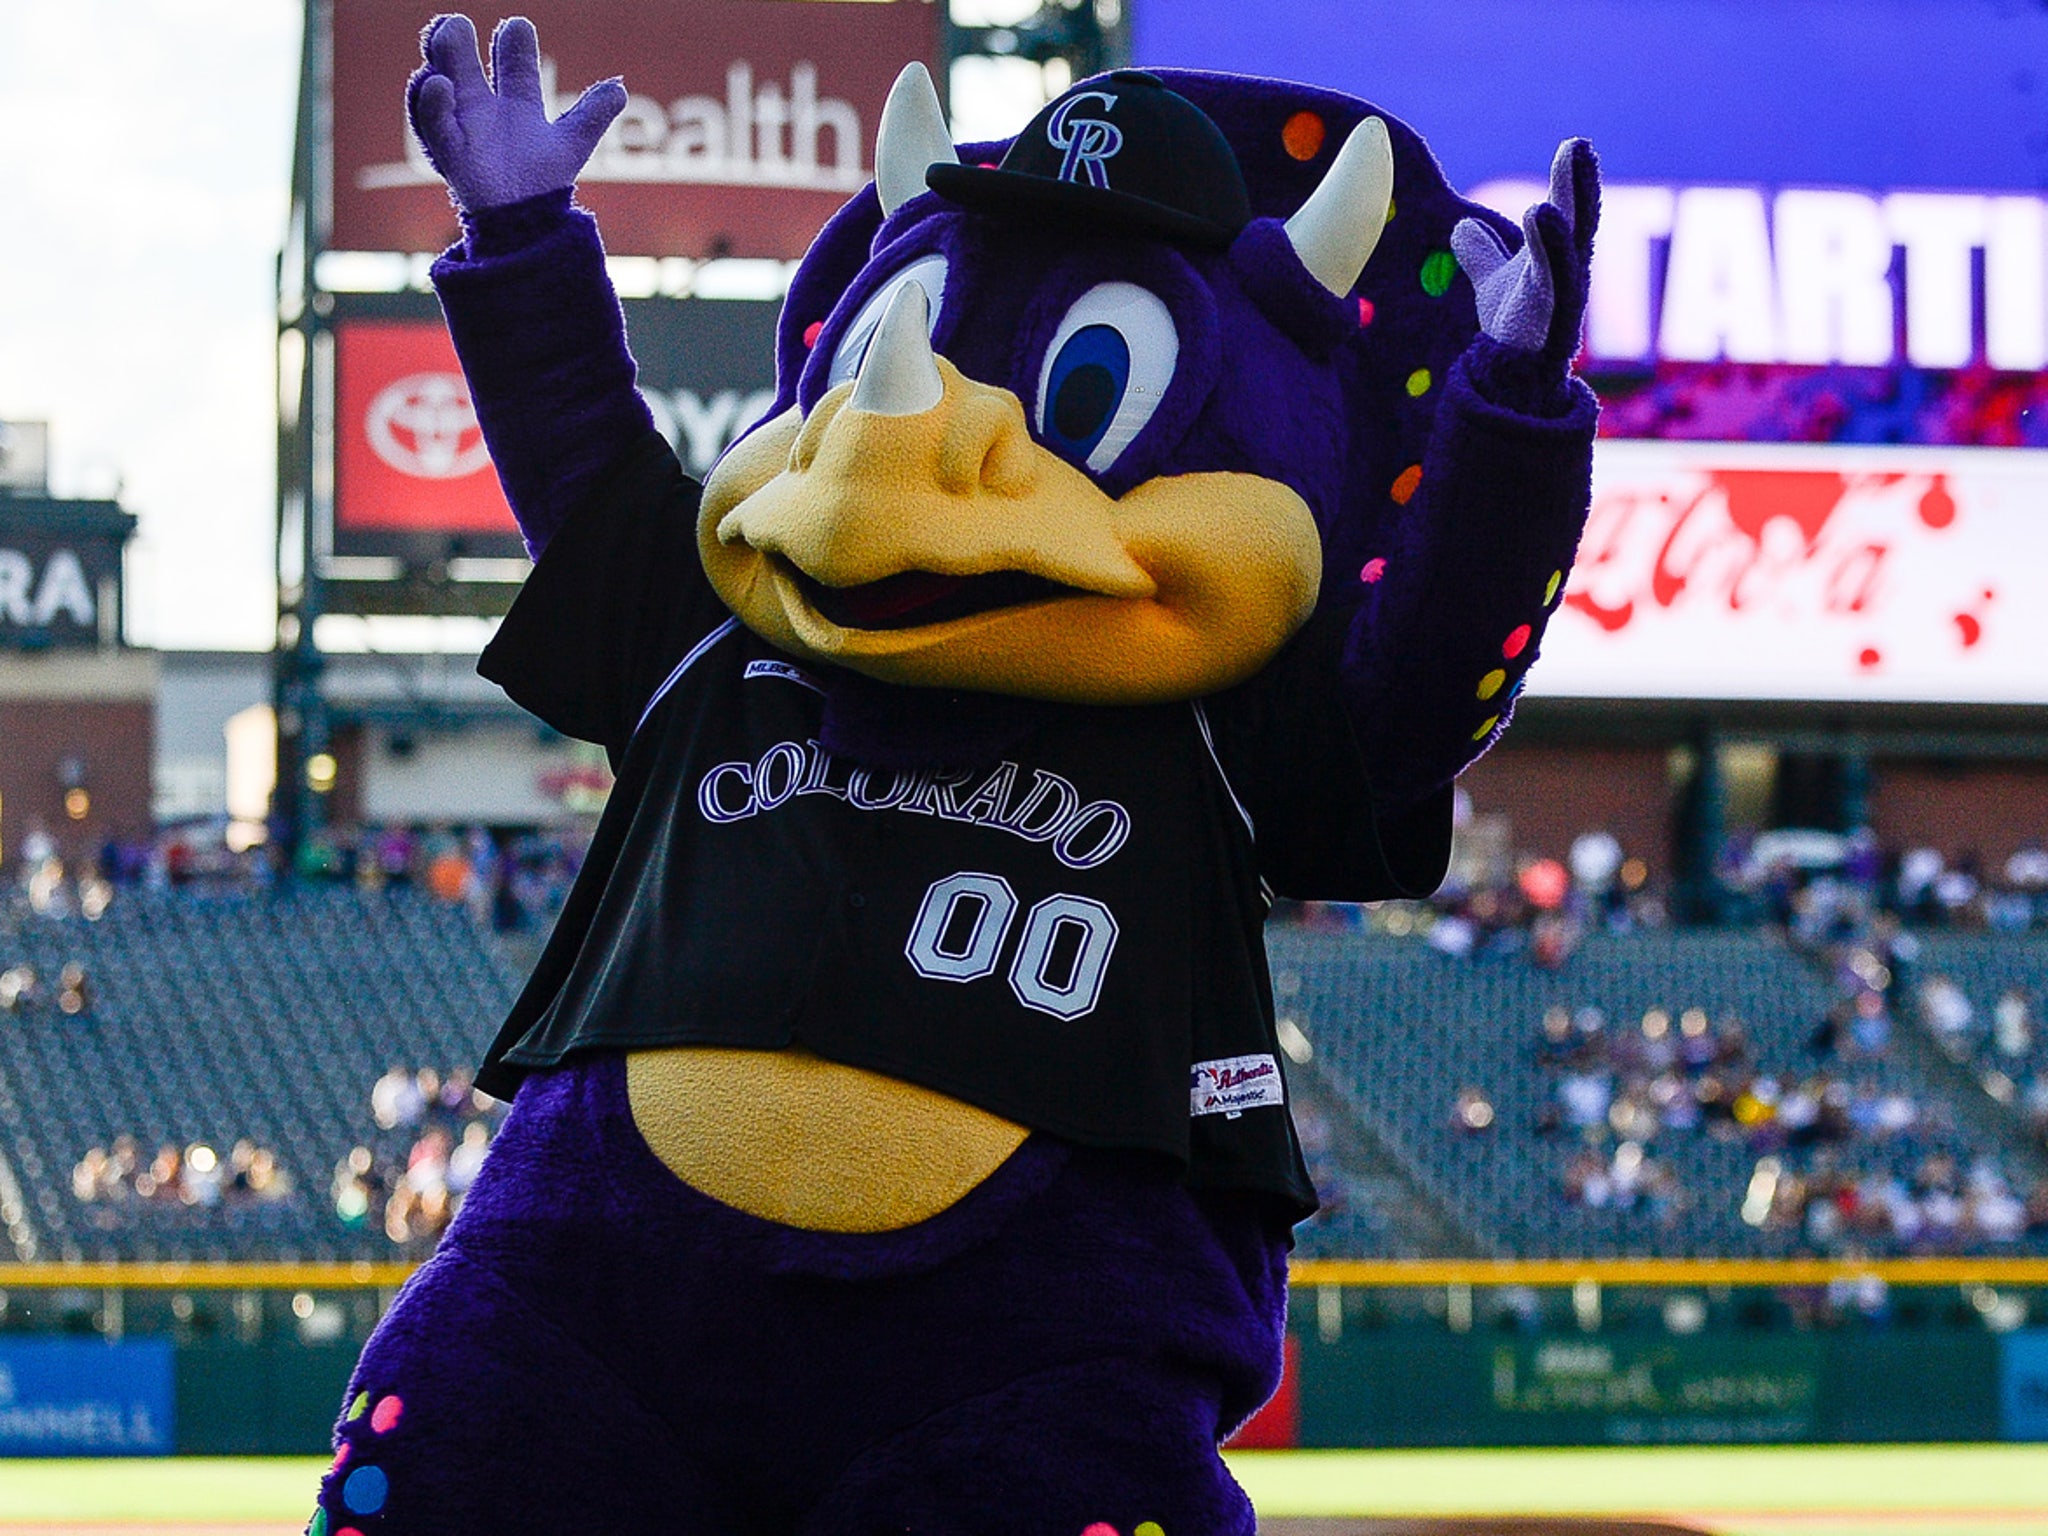 Colorado Rockies mascot dinger the dinosaur in the first inning of